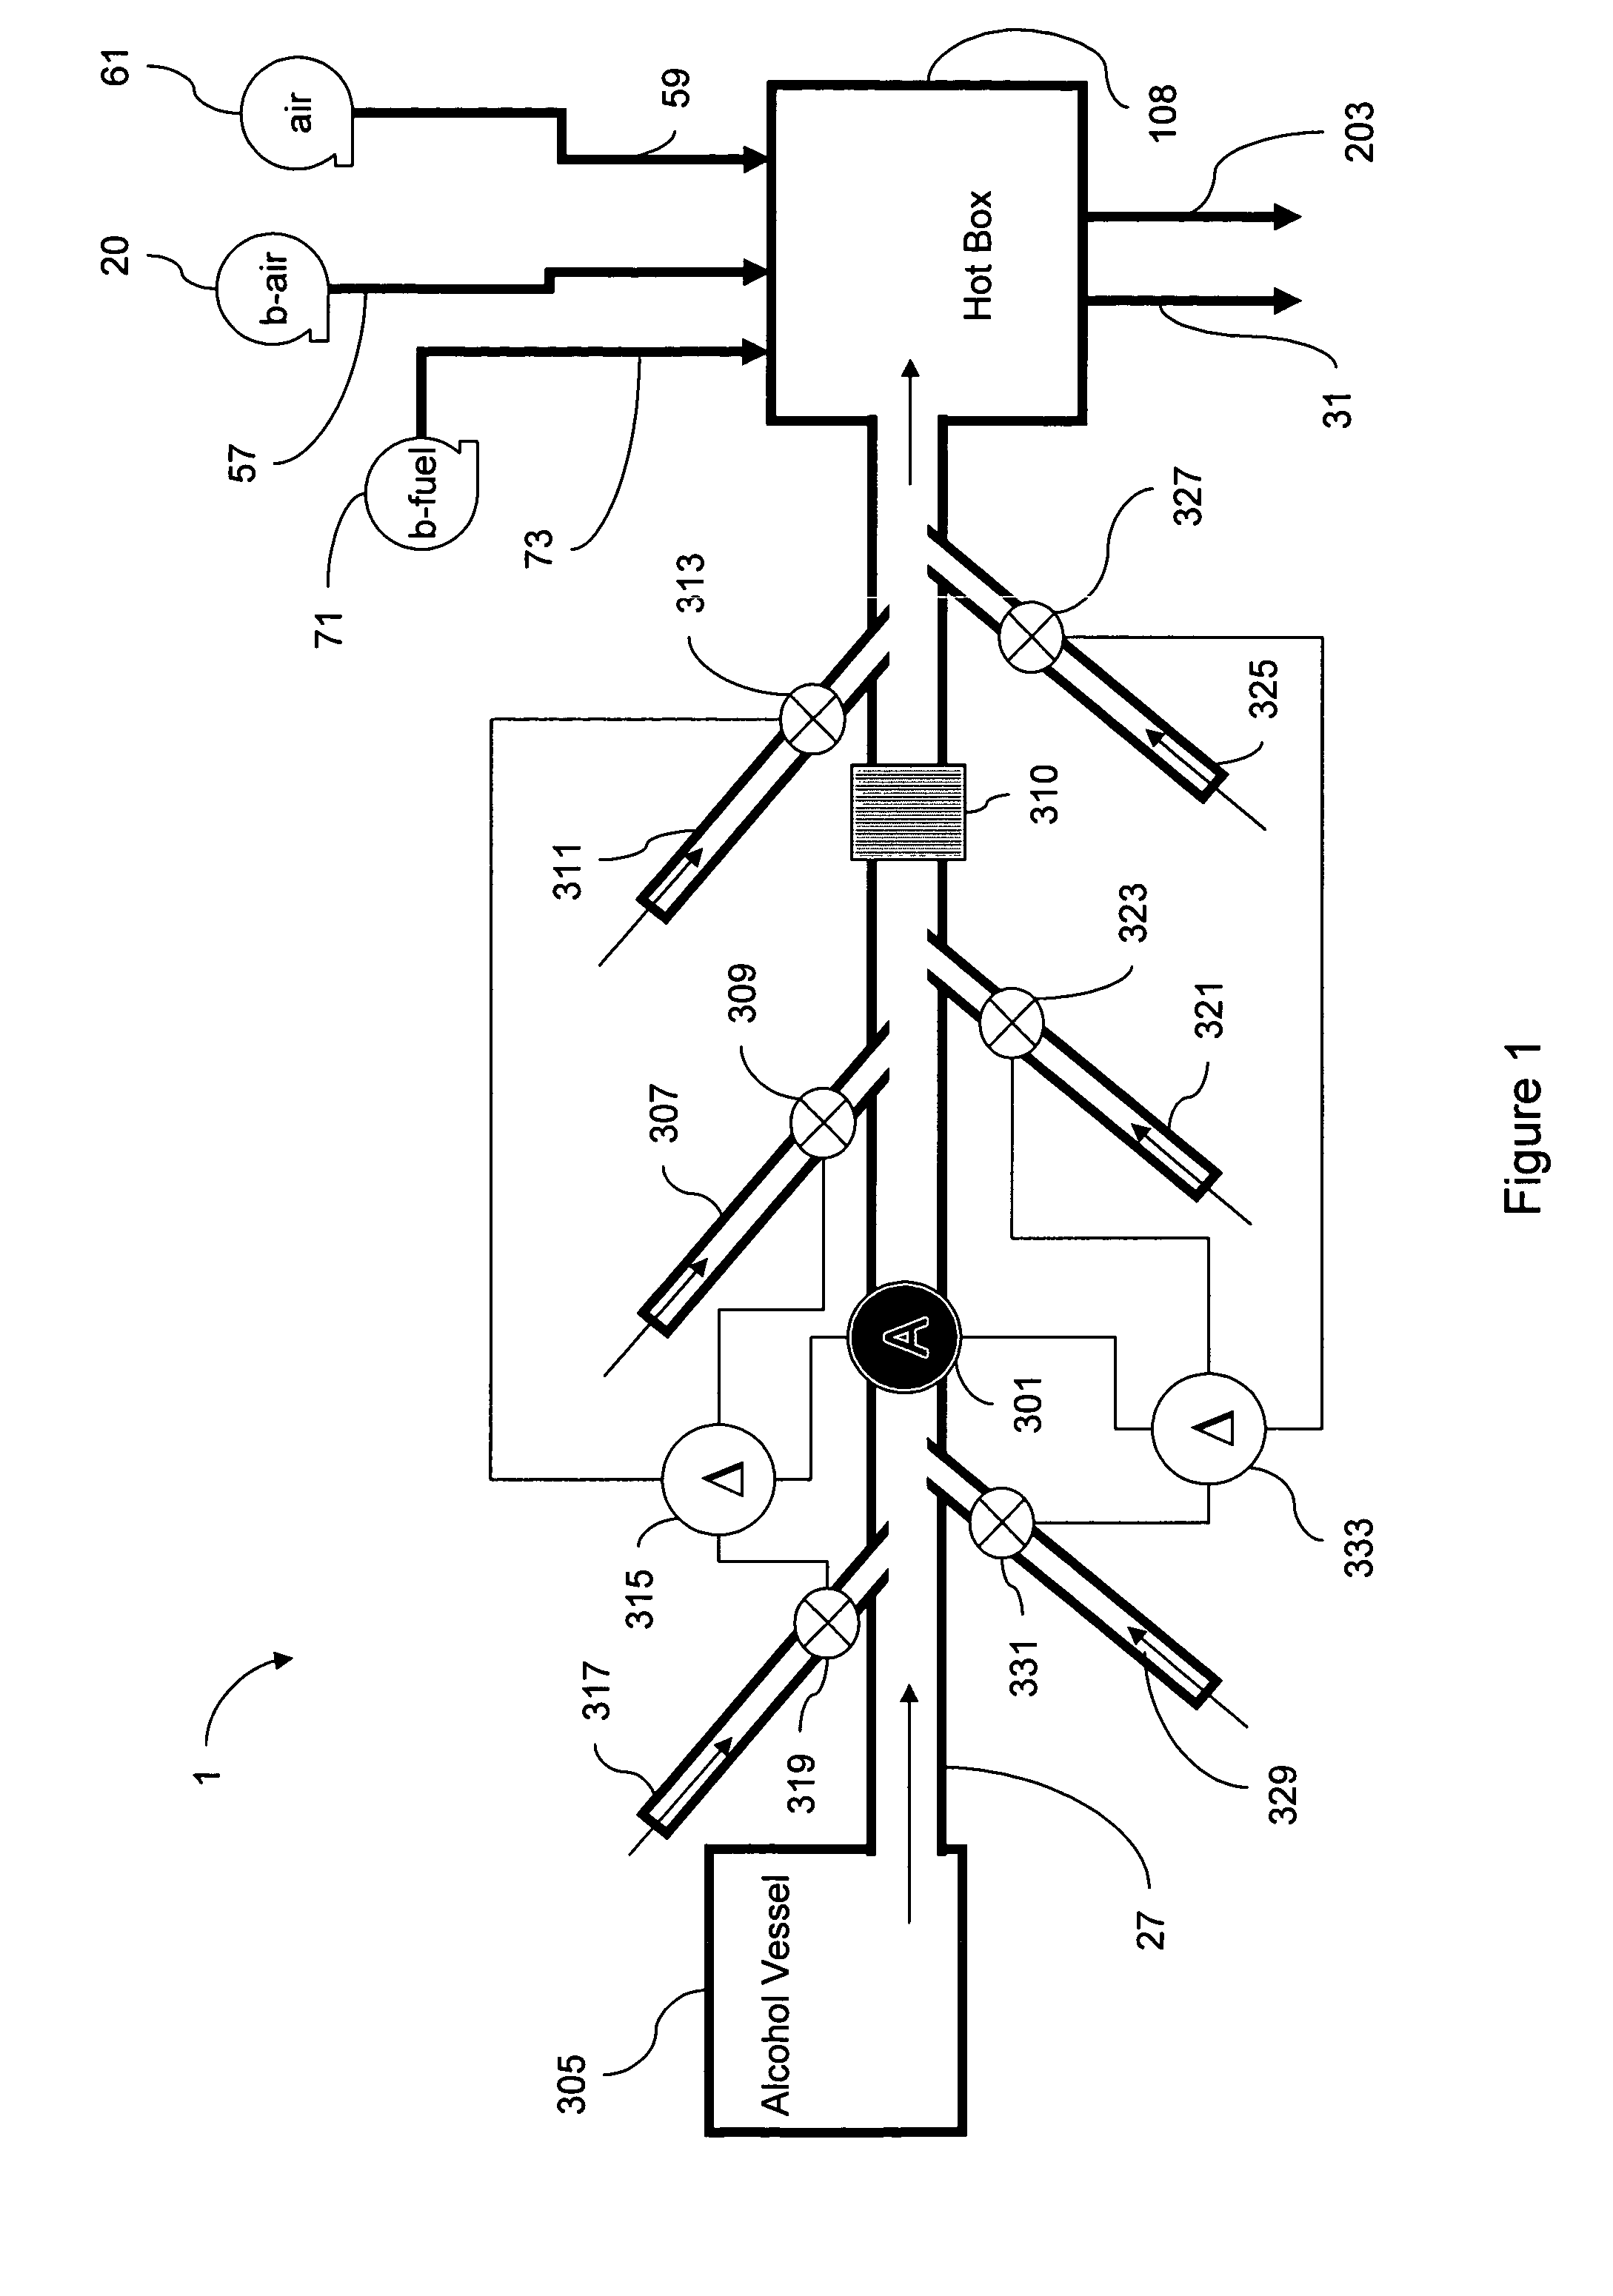 Structure and method for optimizing system efficiency when operating an SOFC system with alcohol fuels